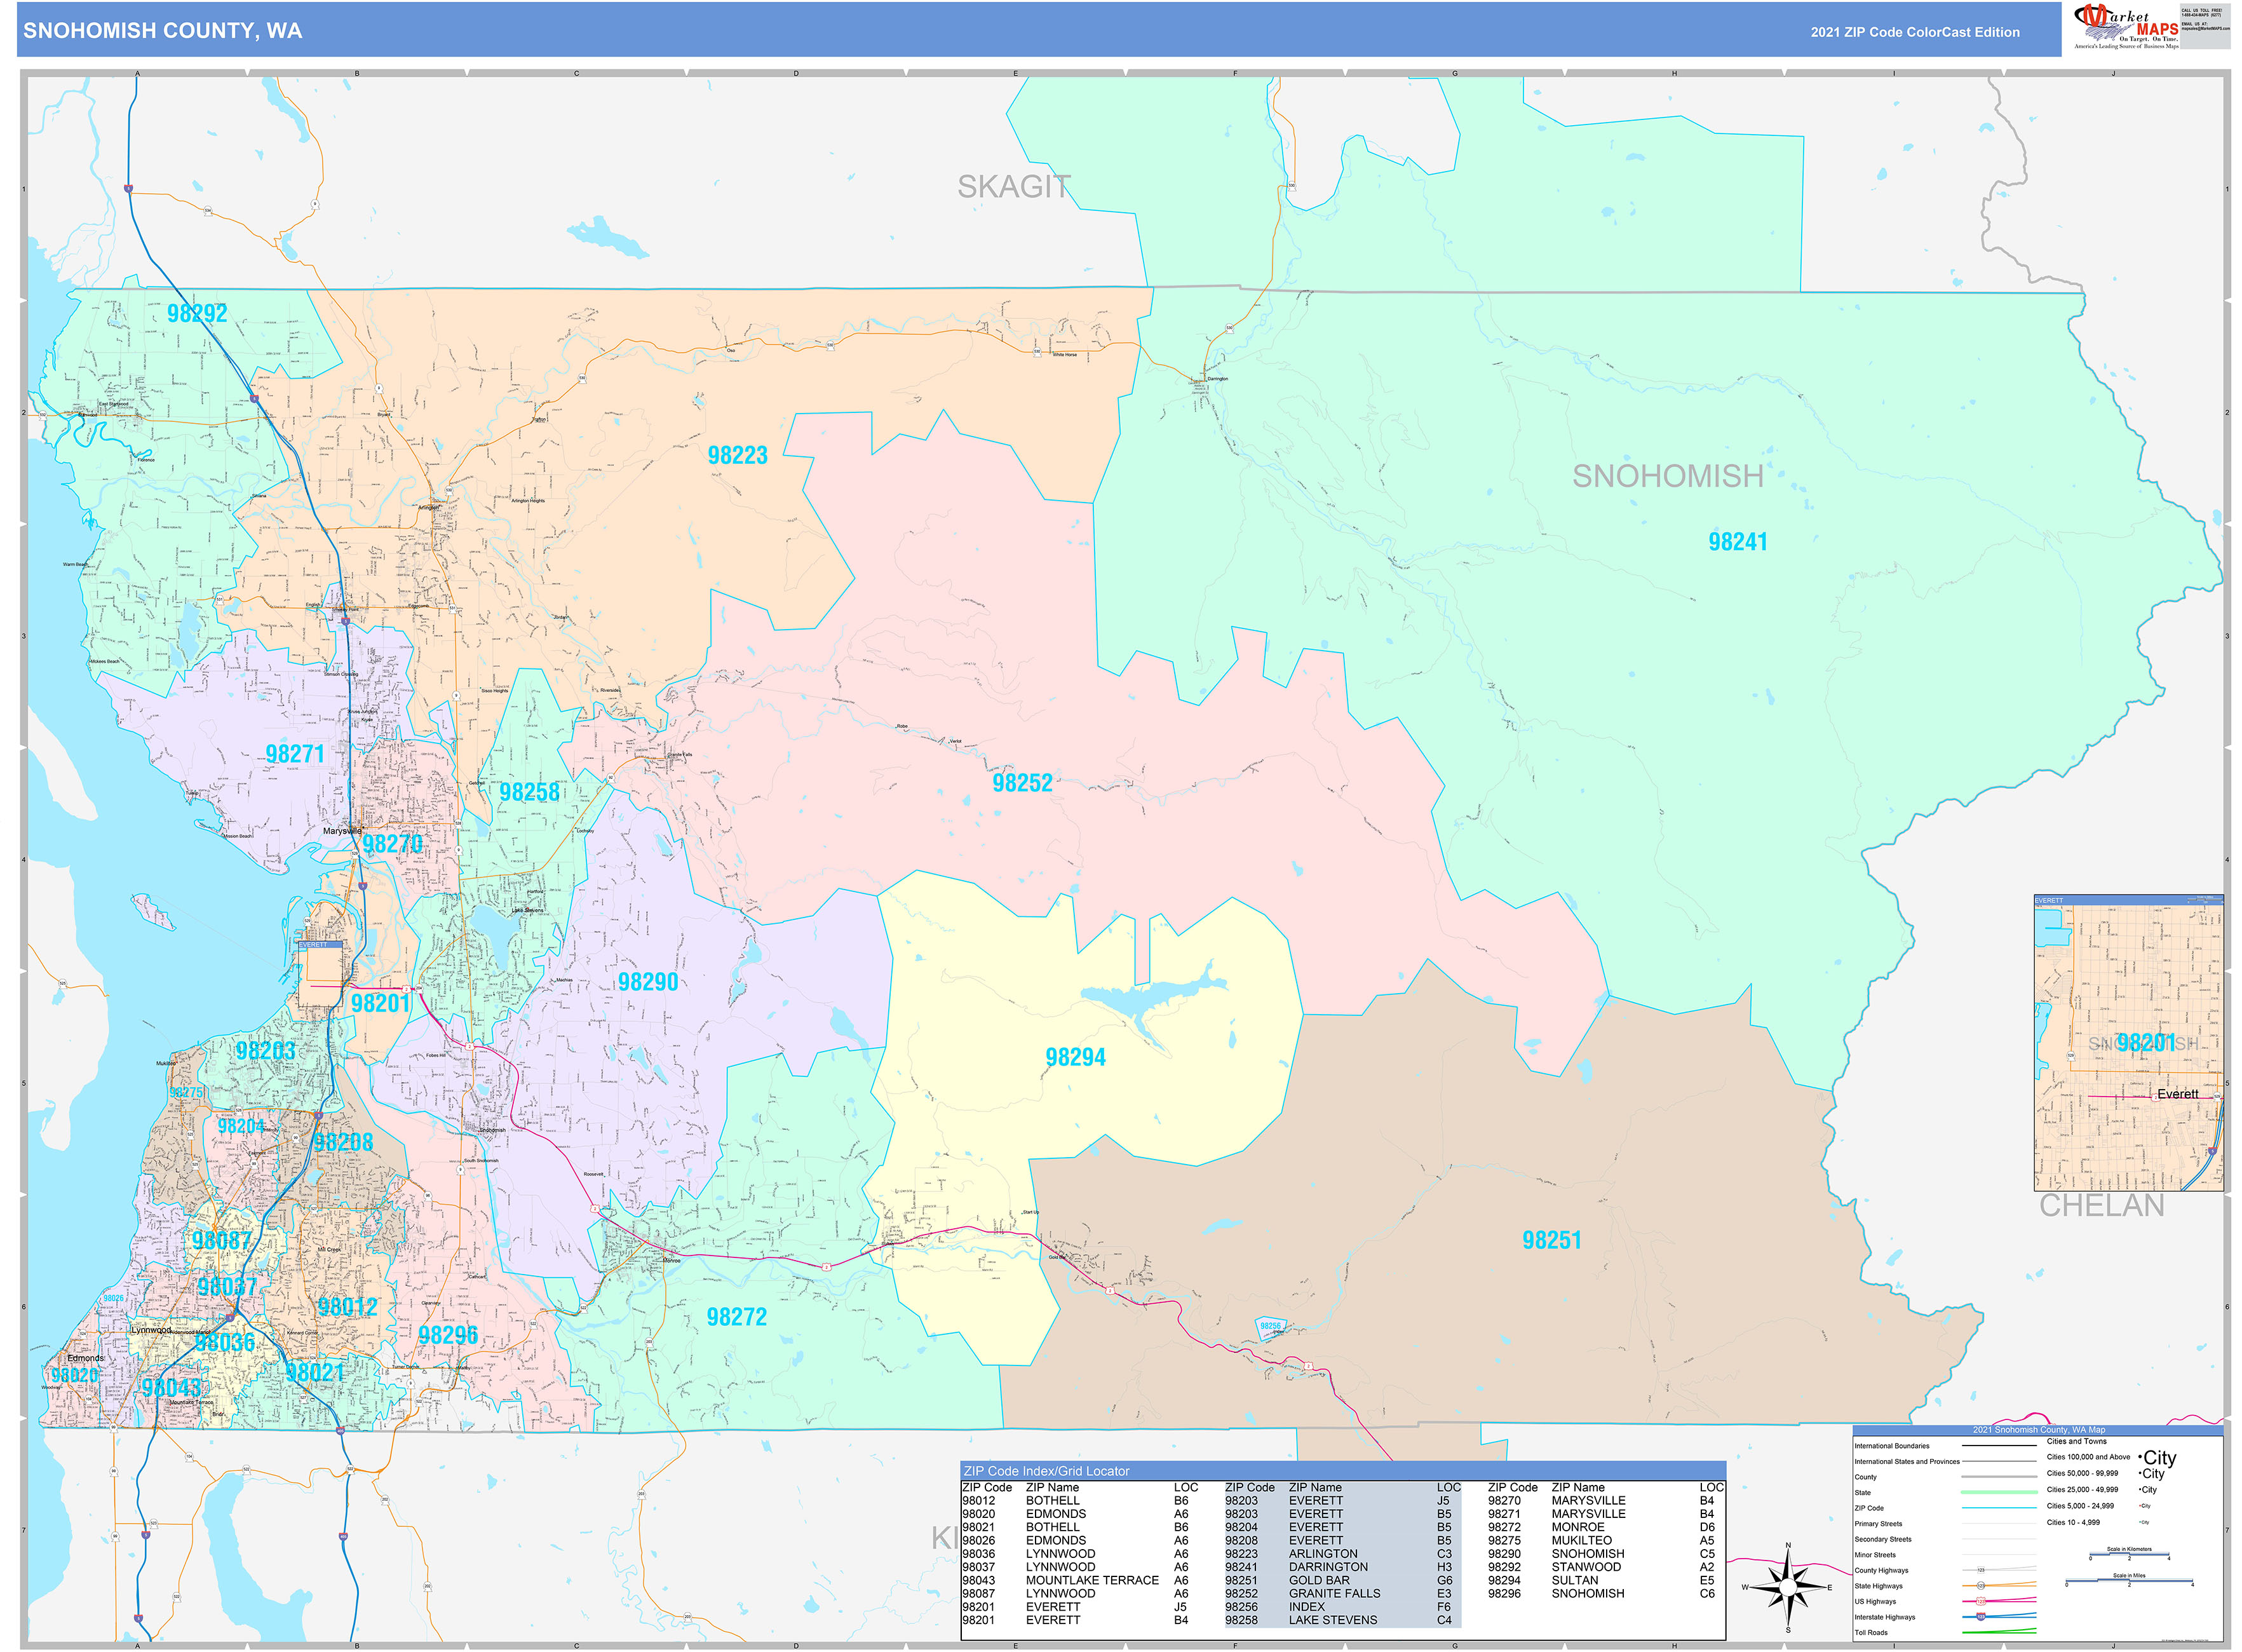 snohomish-county-wa-wall-map-color-cast-style-by-marketmaps-mapsales